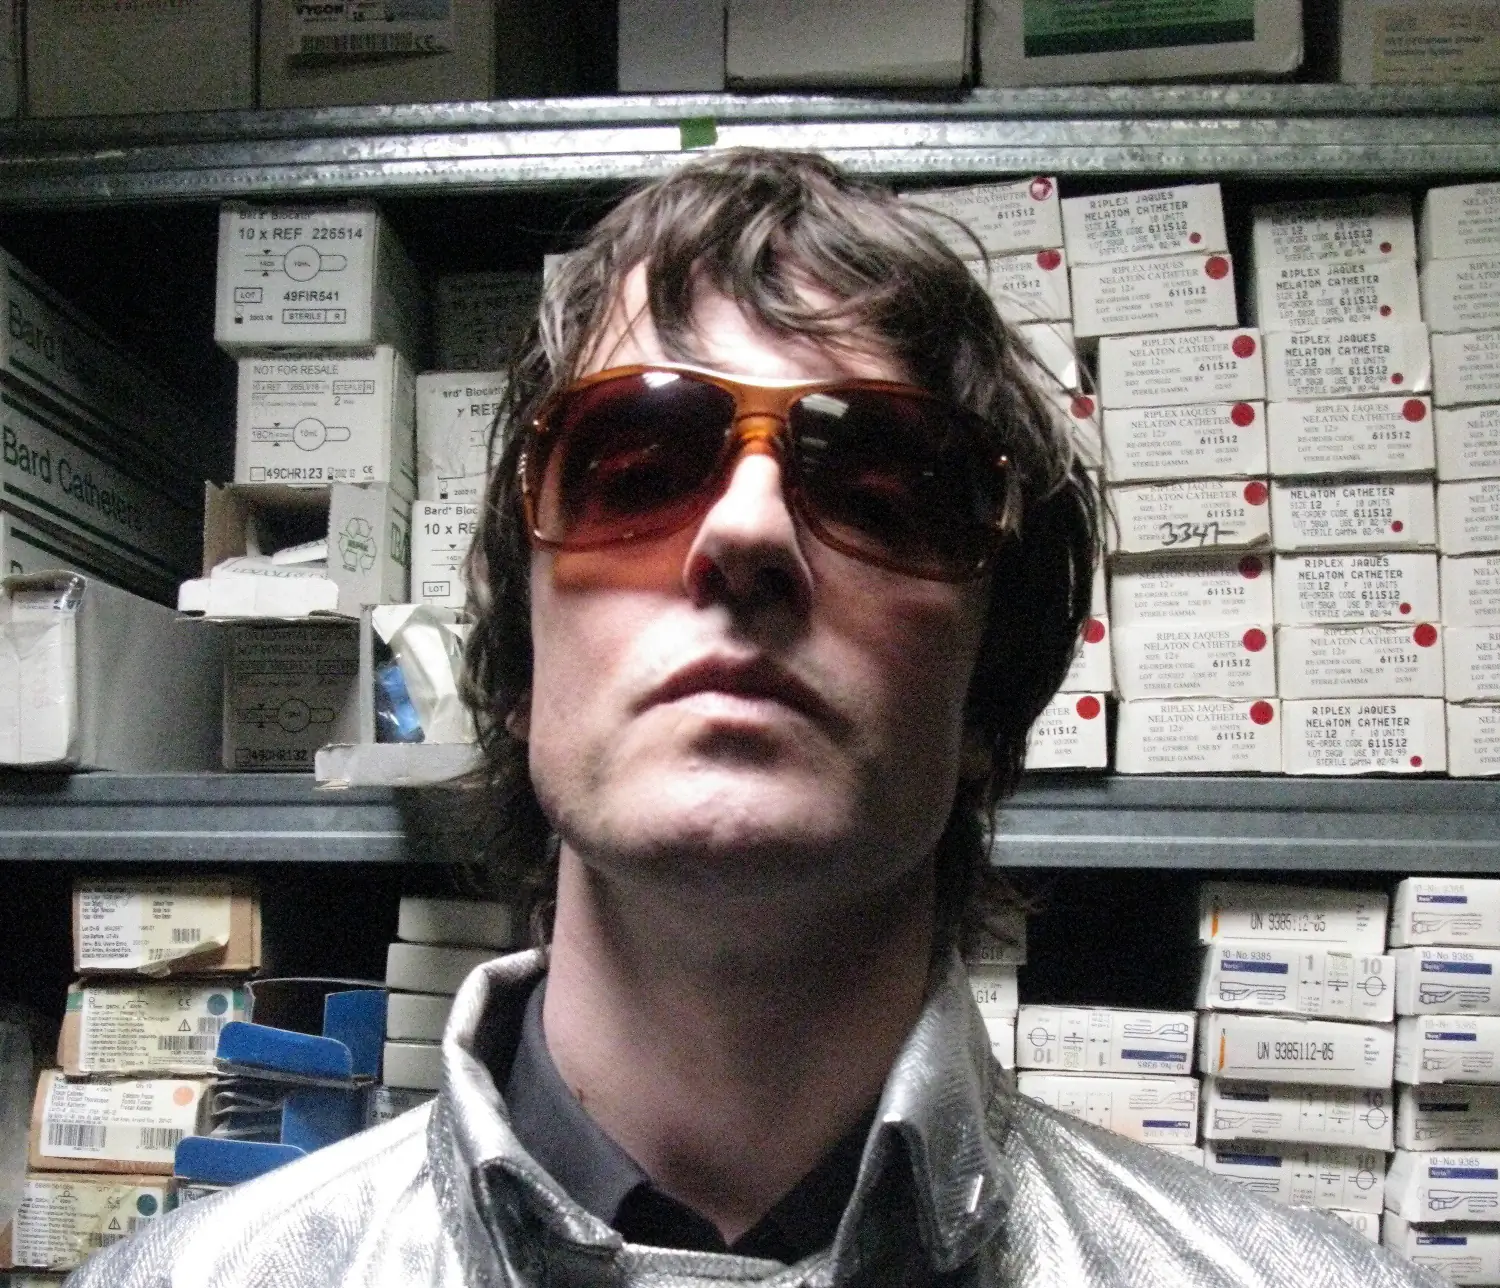 SPIRITUALIZED announce the reissue of ‘Songs in A&E’ – out 21st June